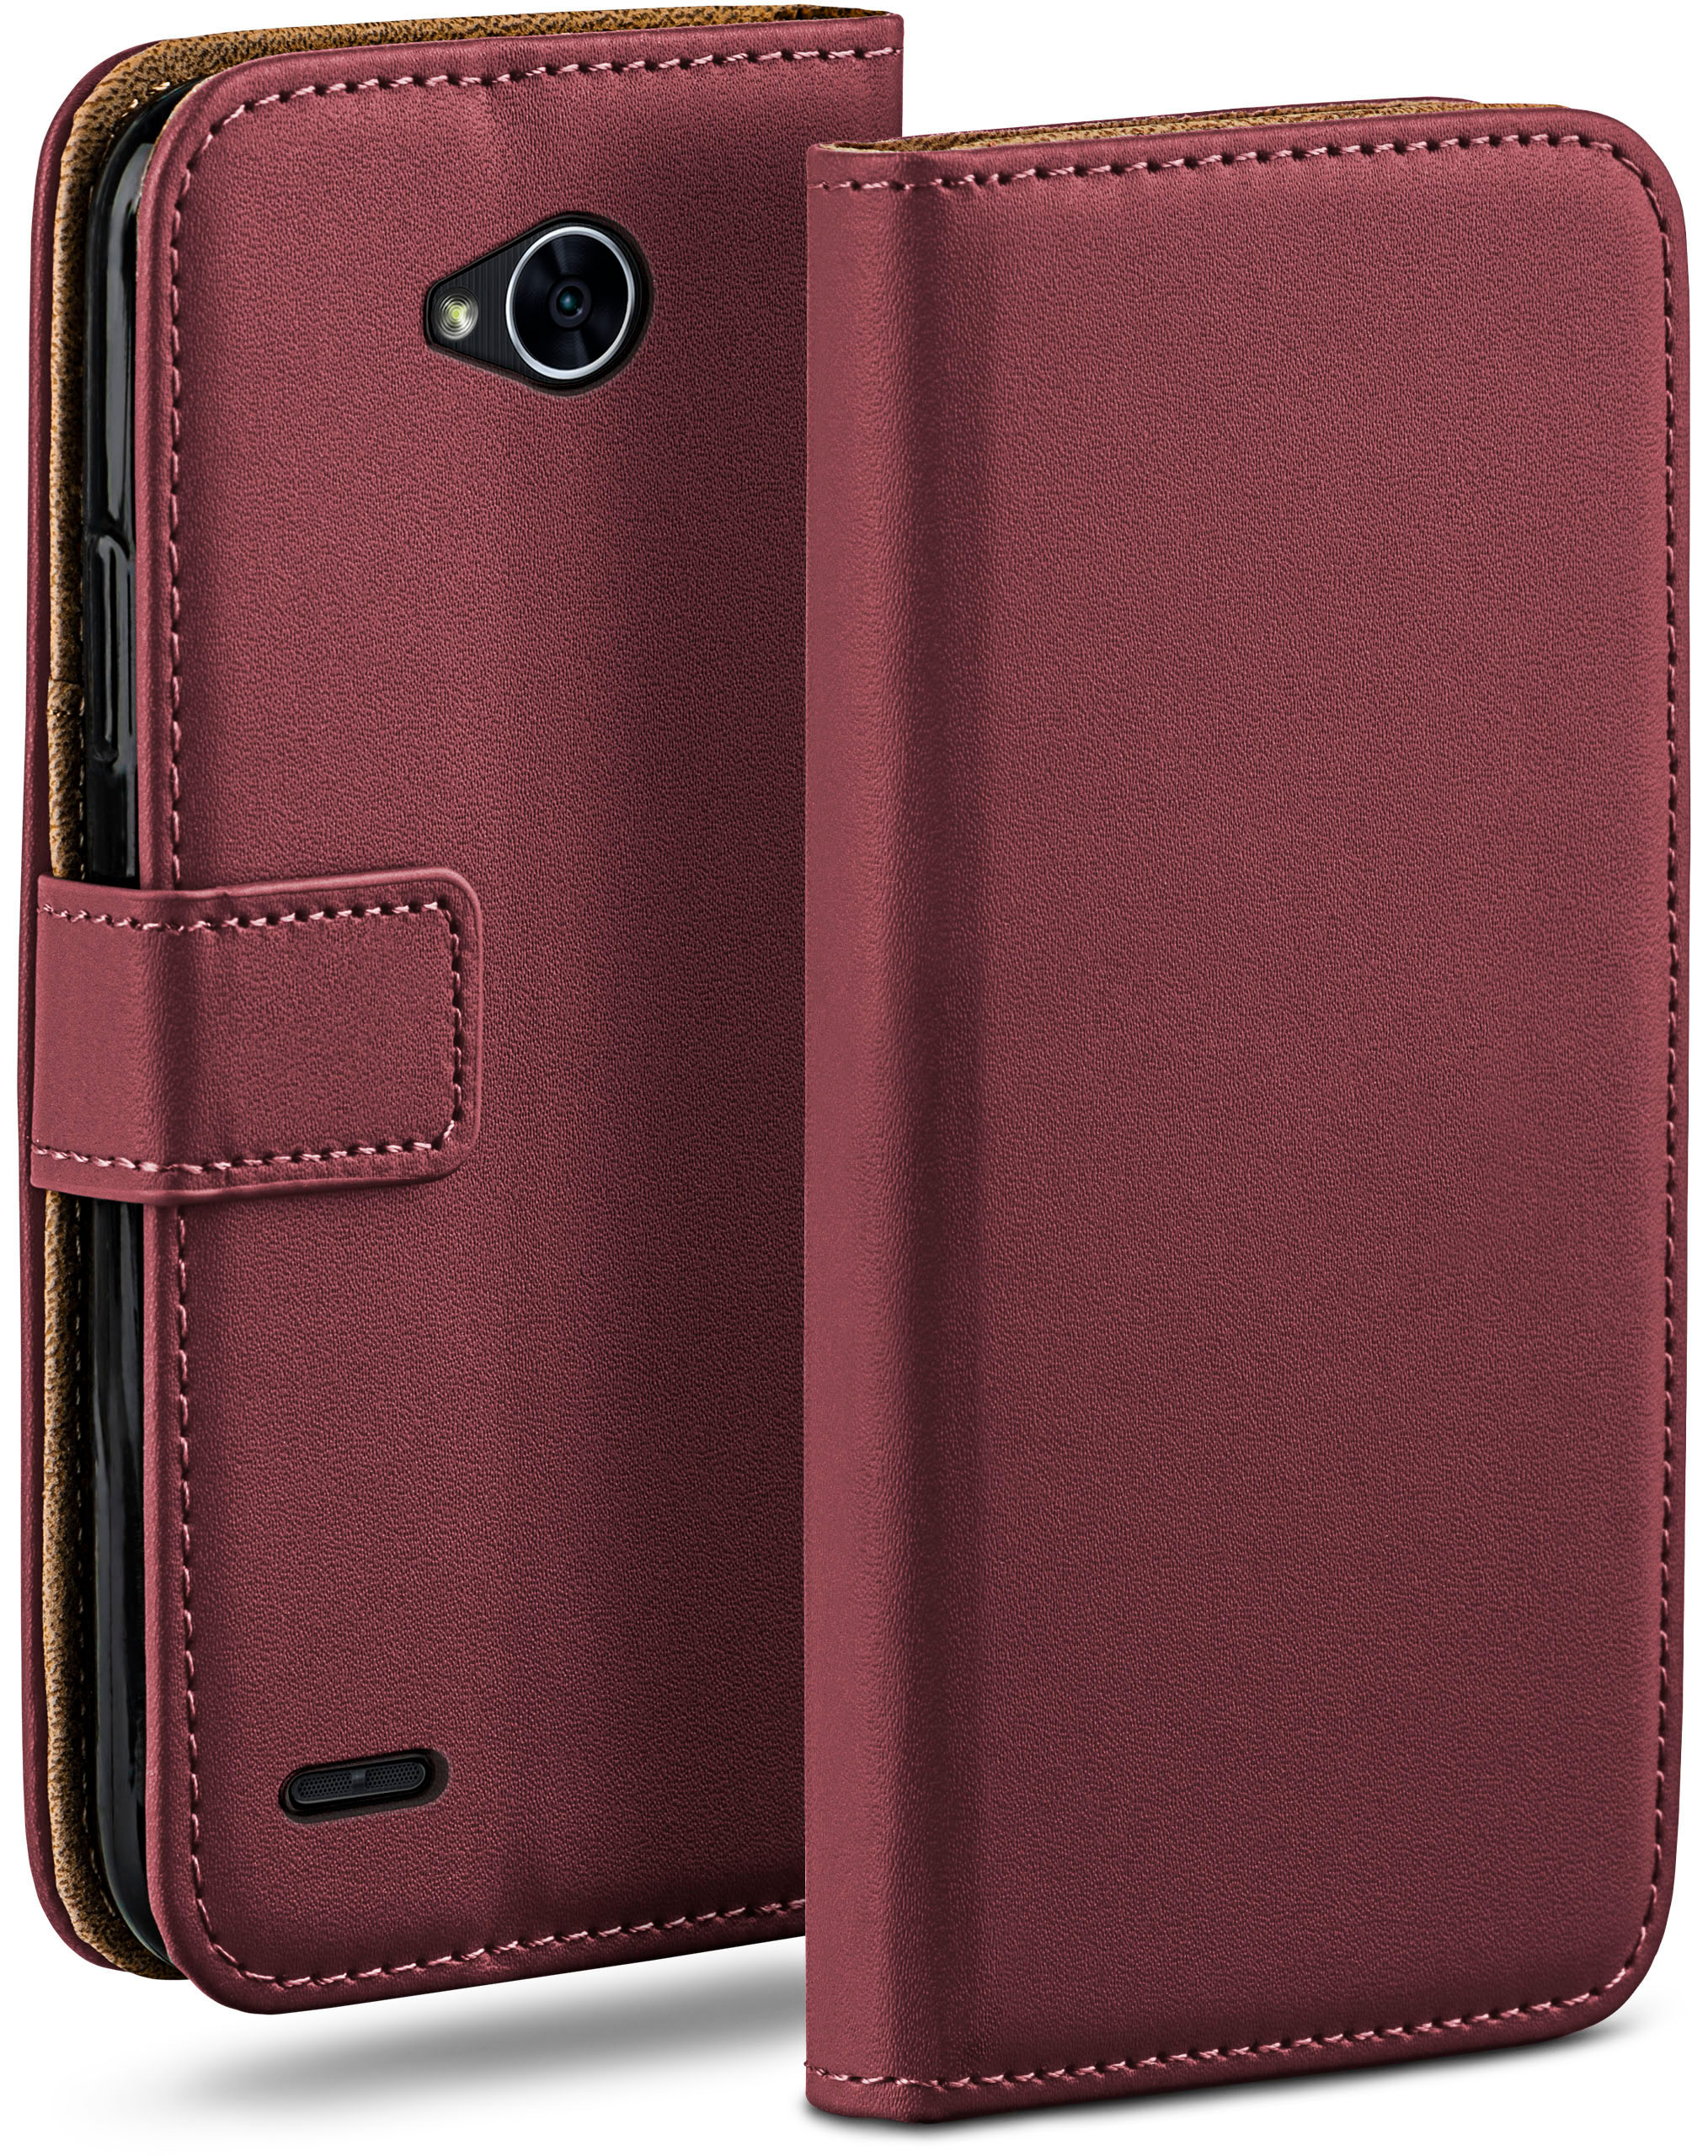 Case, LG, Bookcover, Power Maroon-Red MOEX X 2, Book